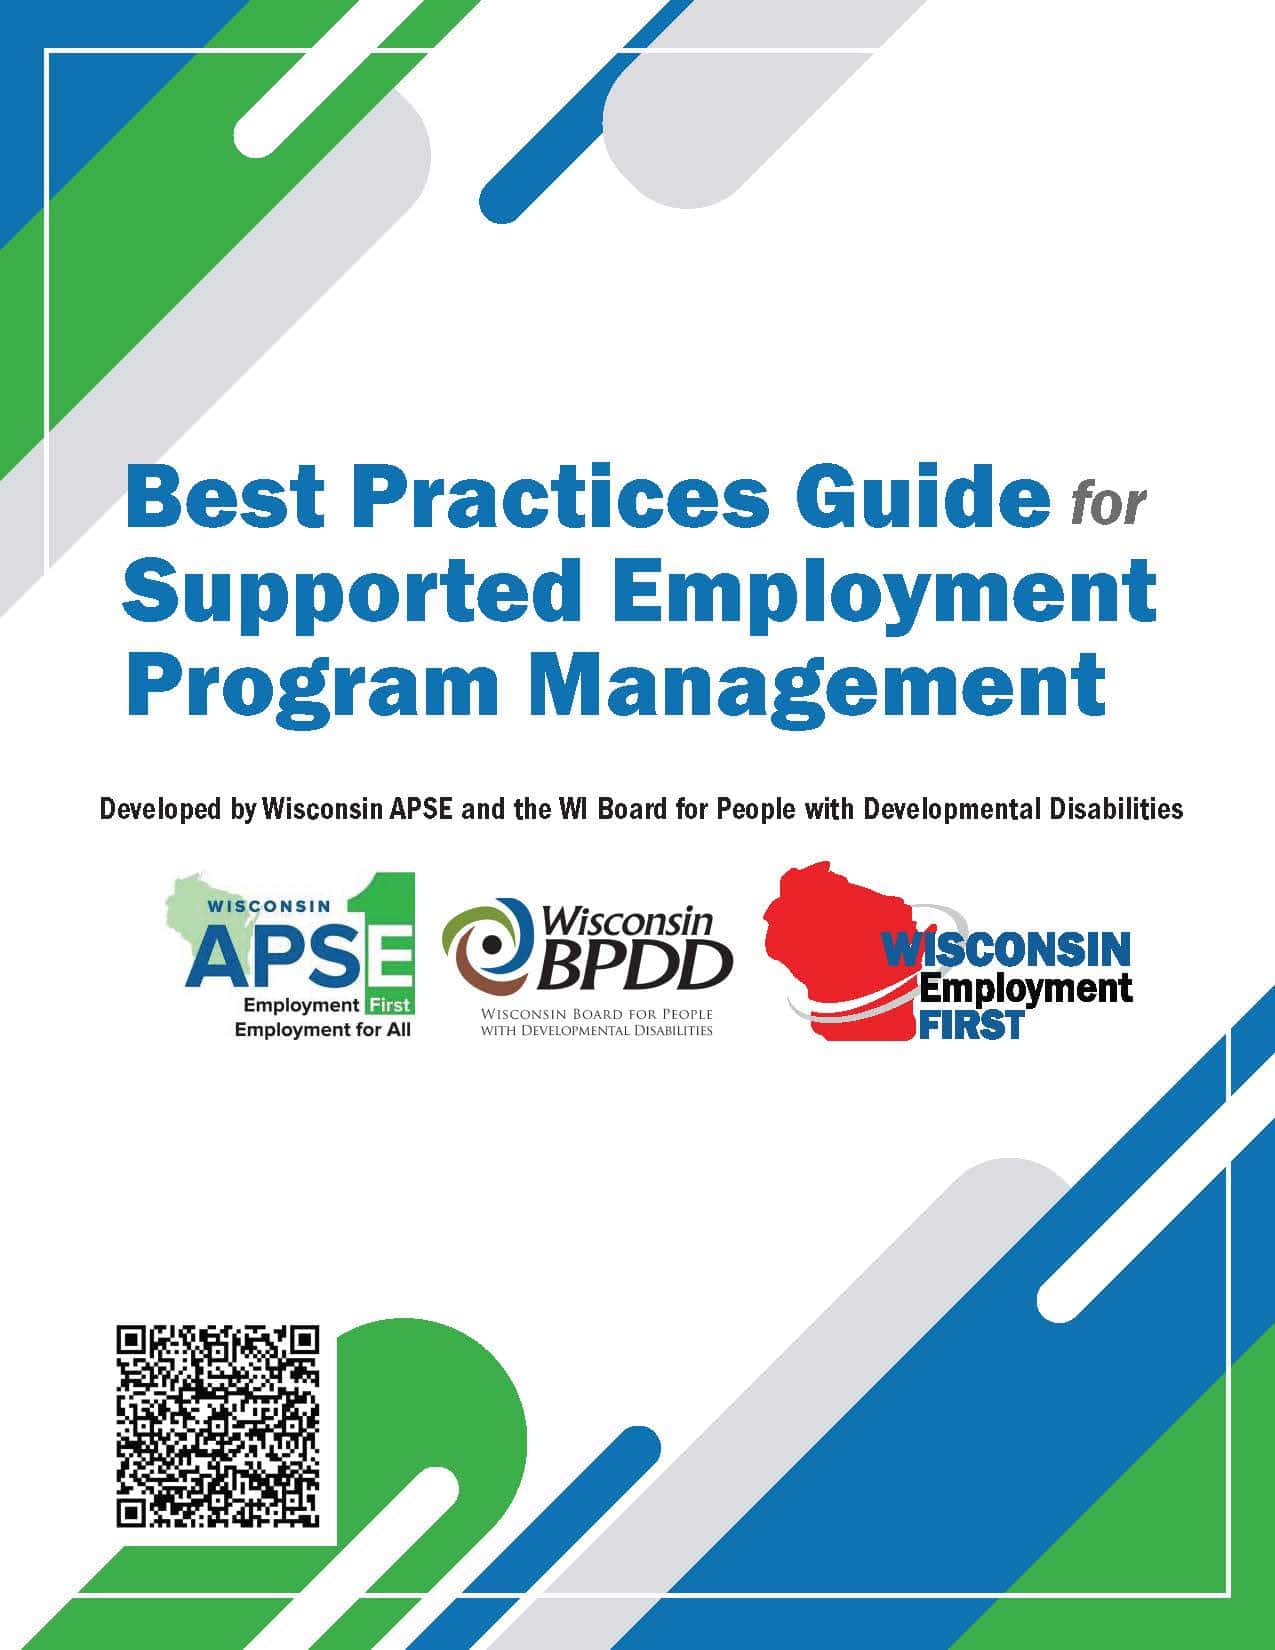 New Supported Employment Program Guide for Managers/Supporters